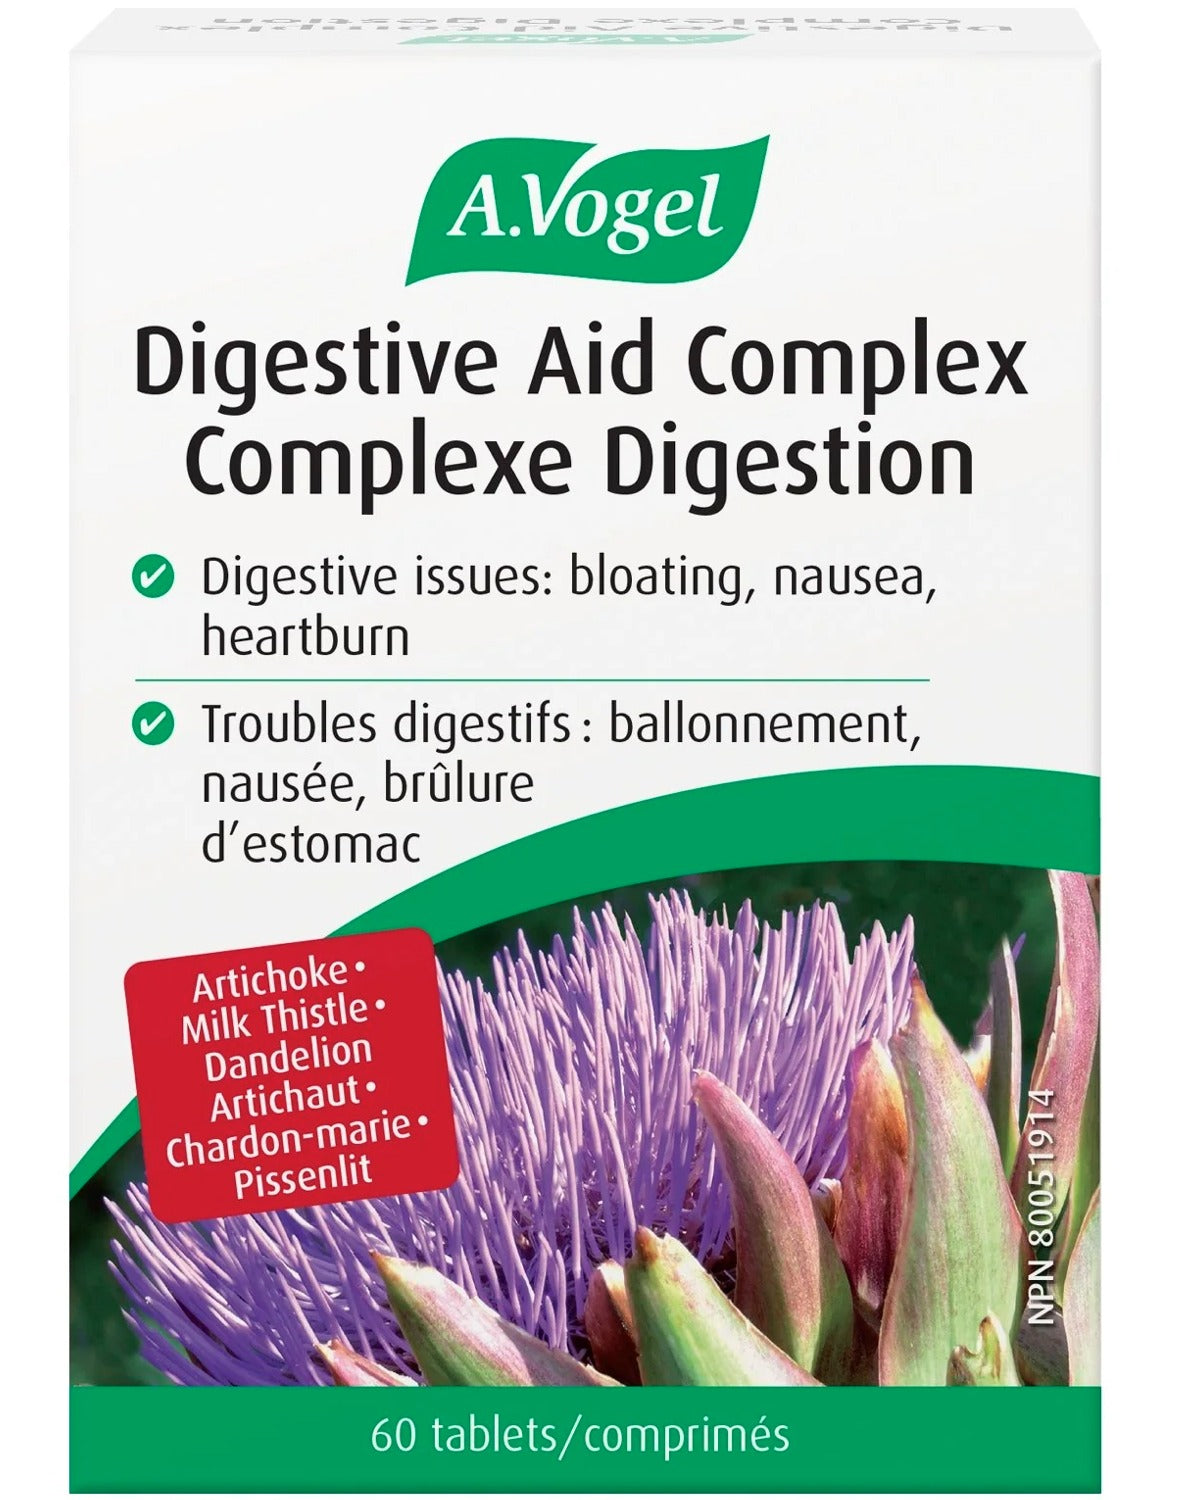 A. VOGEL DIGESTIVE AID COMPLEX (60 Tabs)